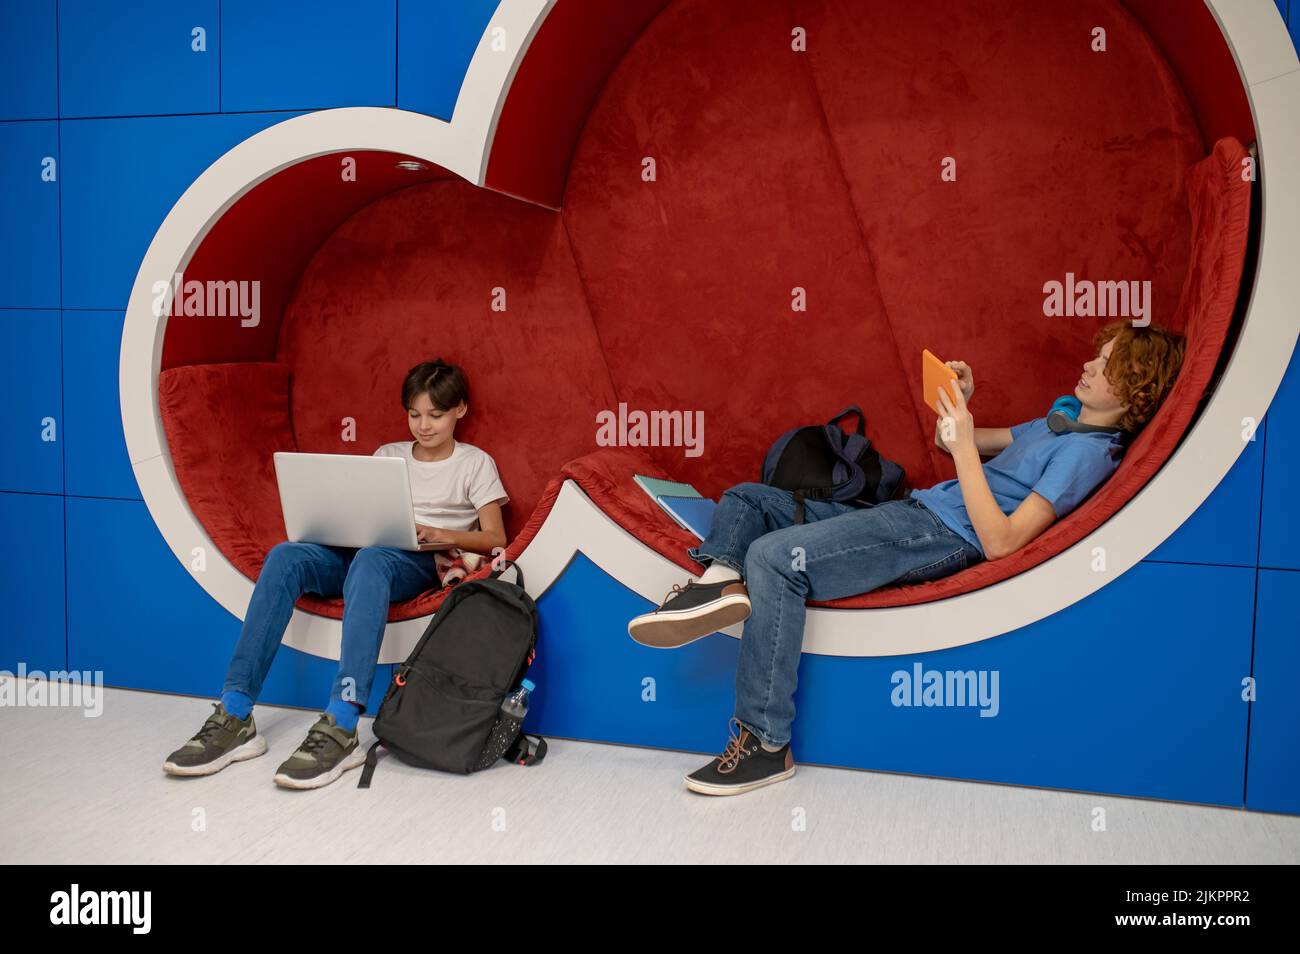 Two school boys feeling comfortable in the lounge zone and doing homework Stock Photo